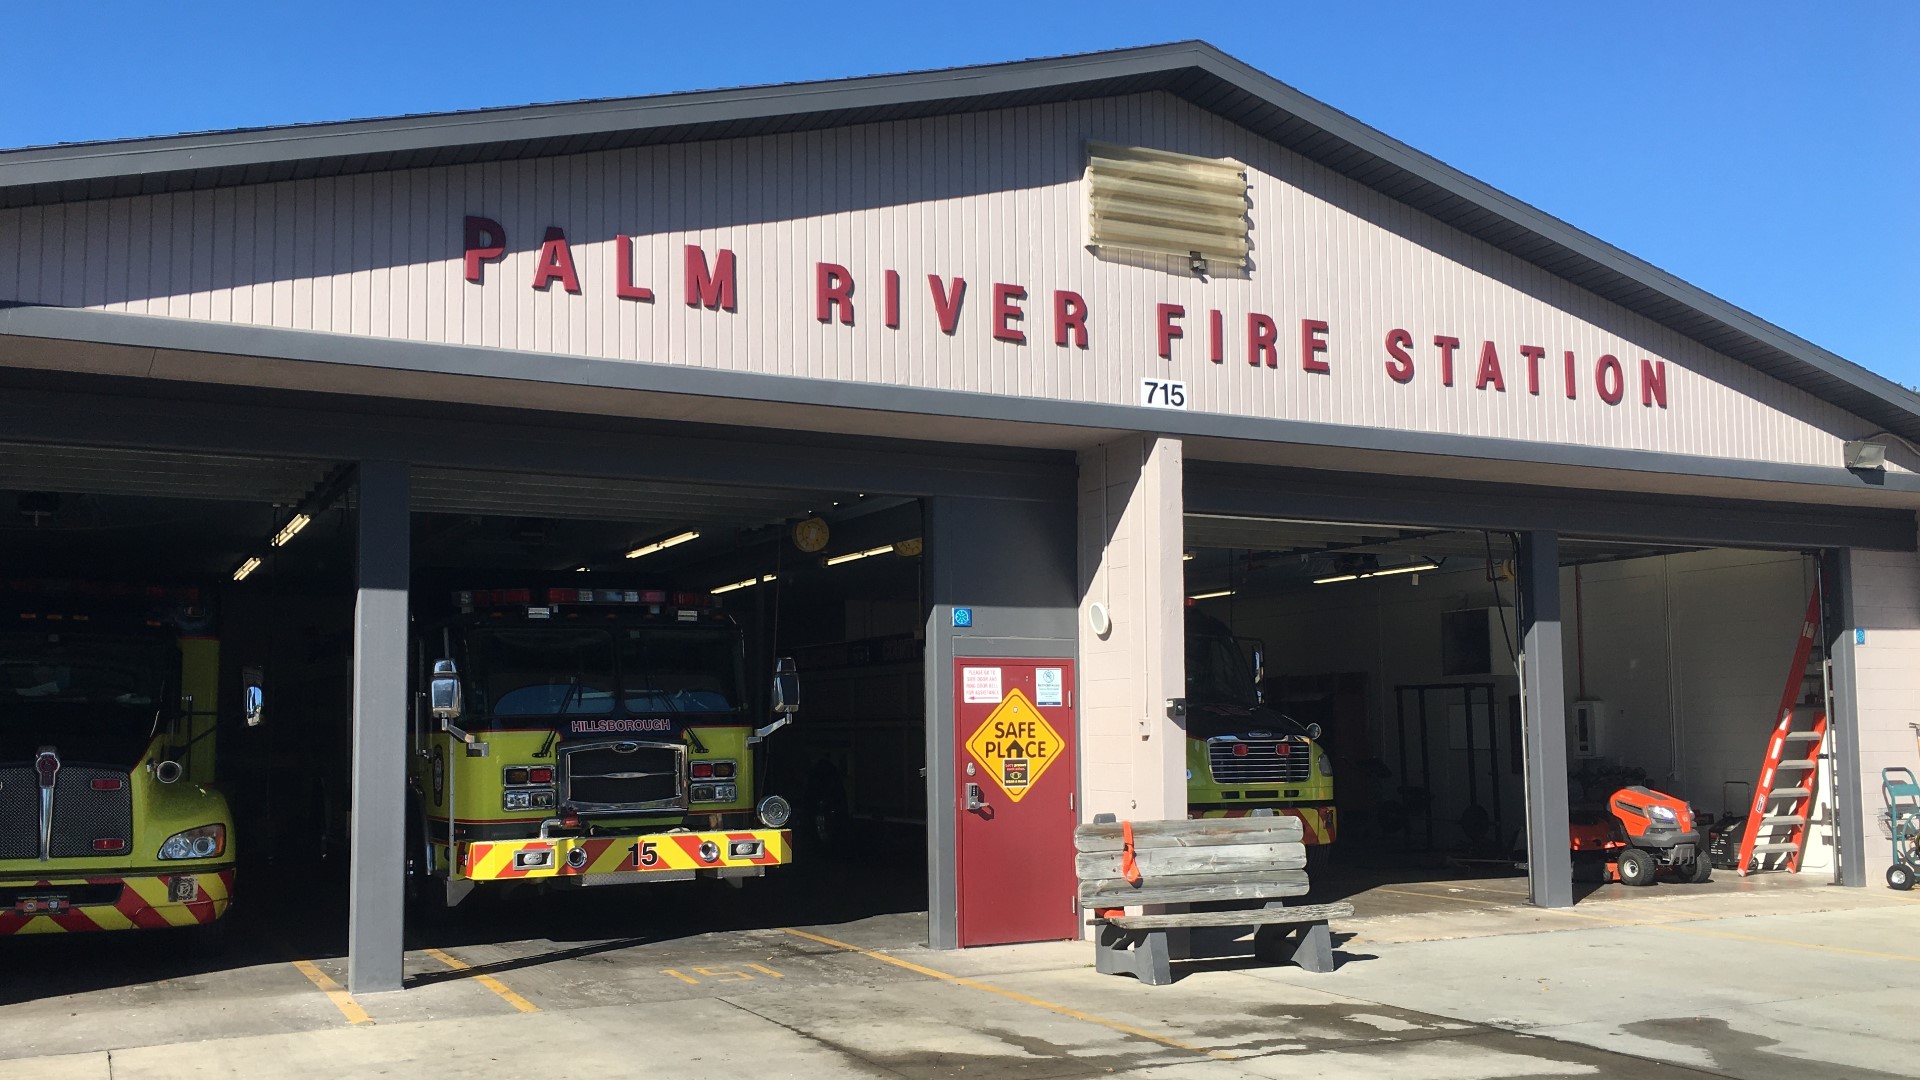 Replacement Fire Station Will Expand Hillsborough County's Reach and  Shorten Response Times - Westchase WOW